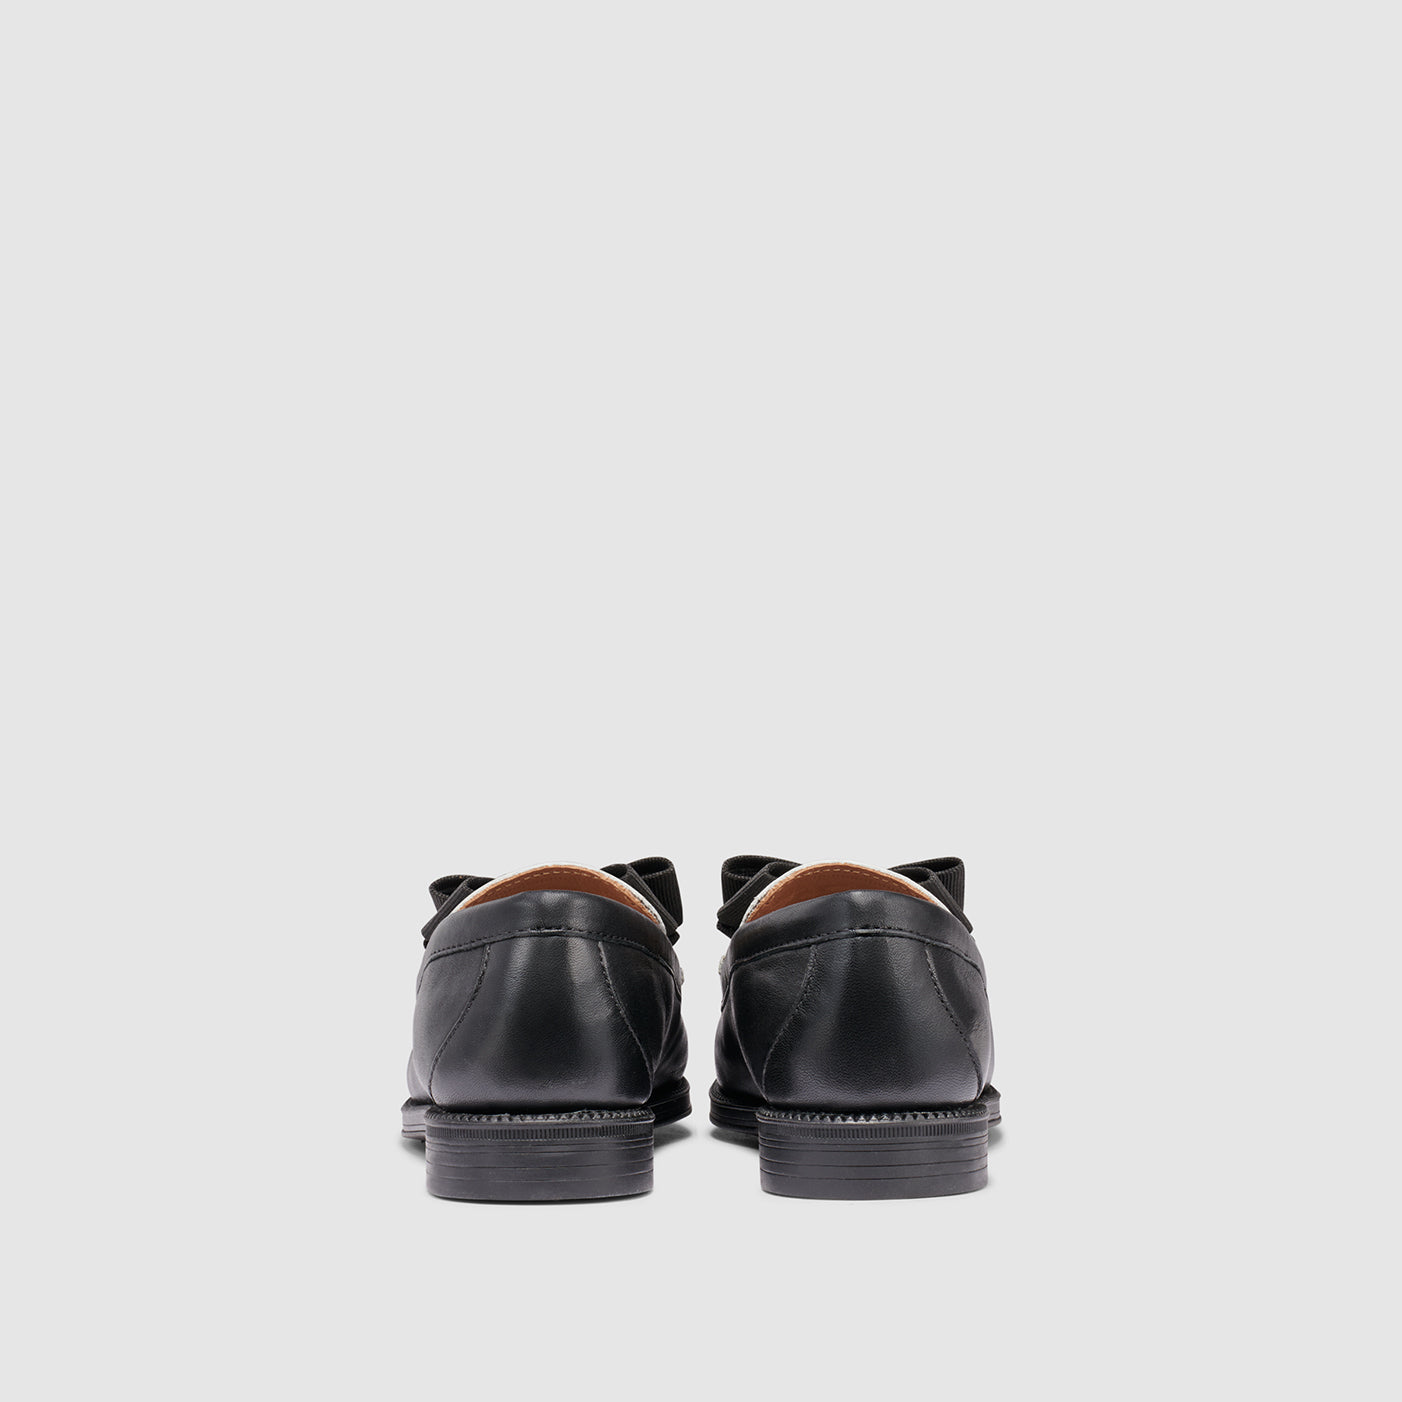 KIDS LILLIAN BOW WEEJUNS LOAFER